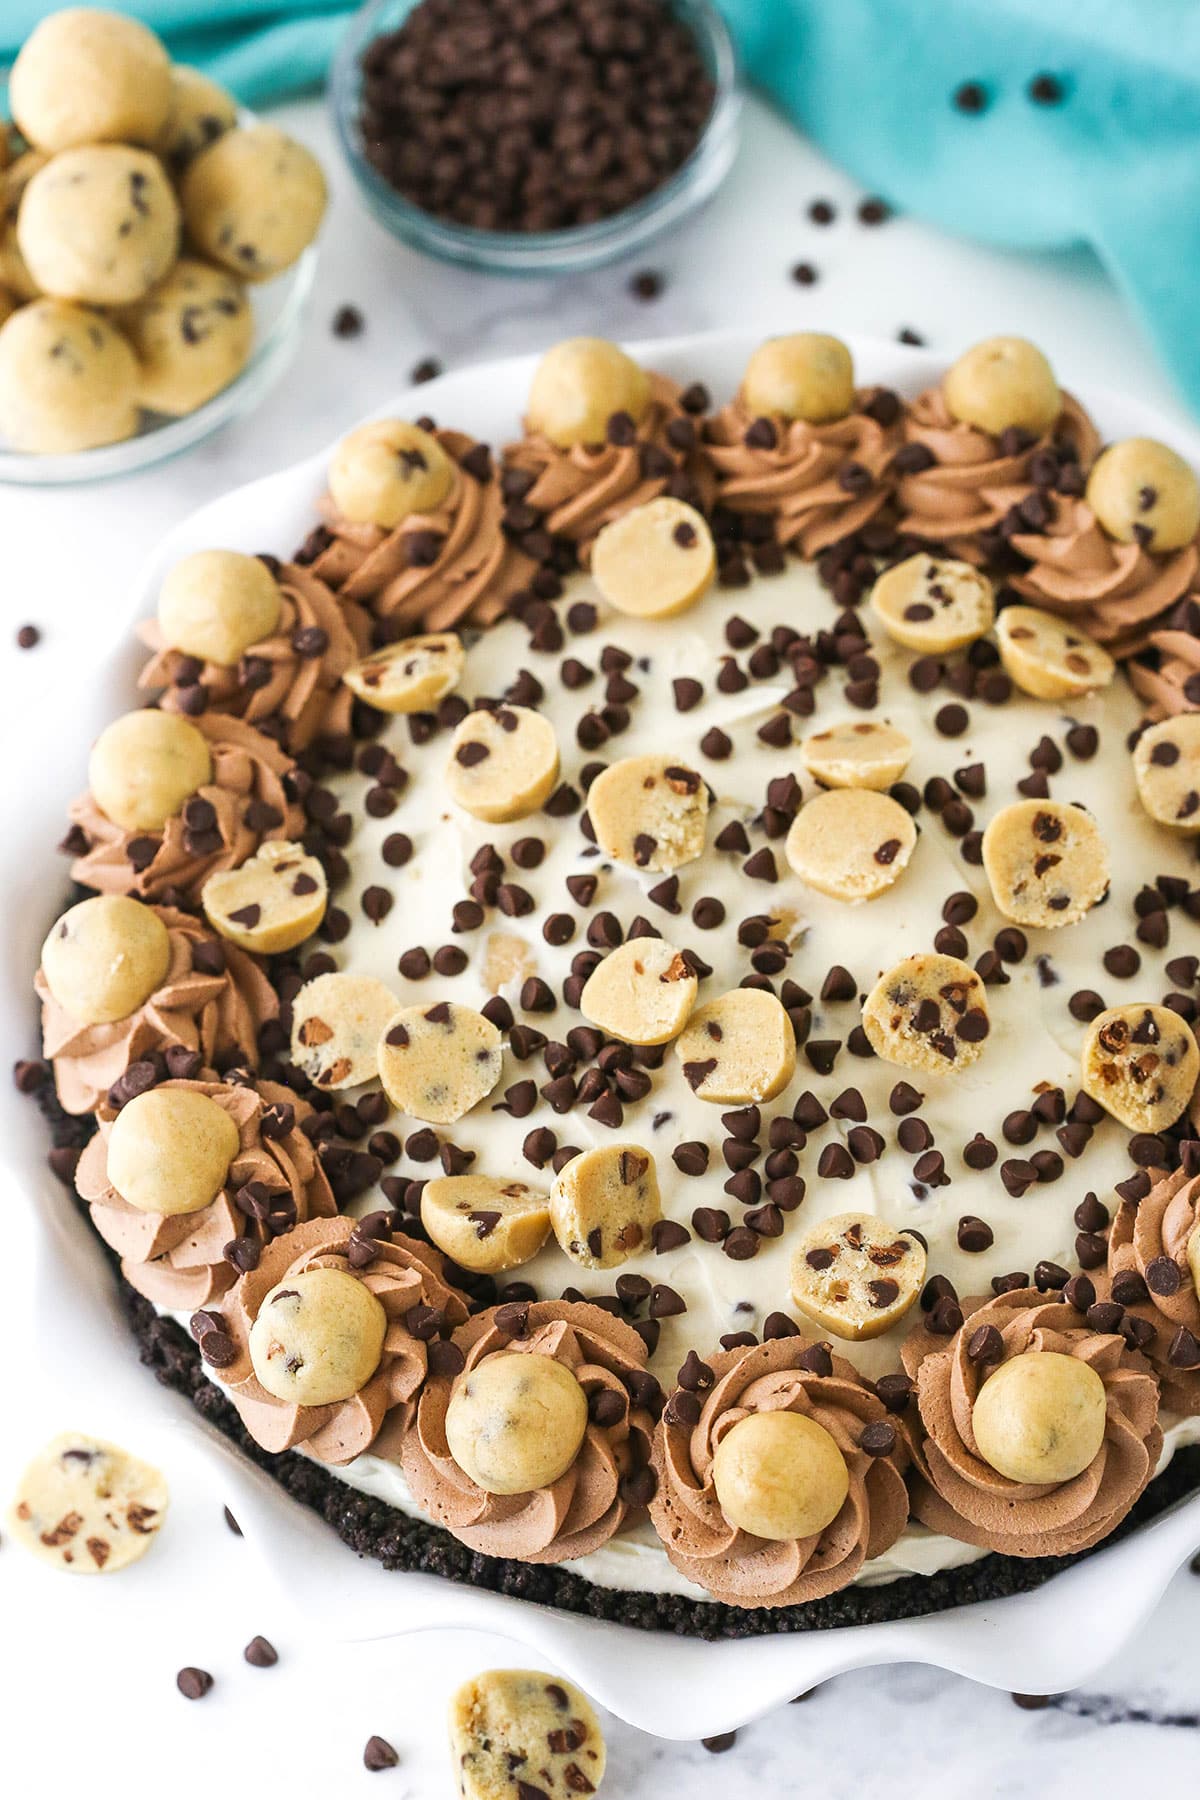 Overhead view of a full Chocolate Chip Cookie Dough Ice Cream Pie in a white platter with cookie dough balls and chocolate chips in the background